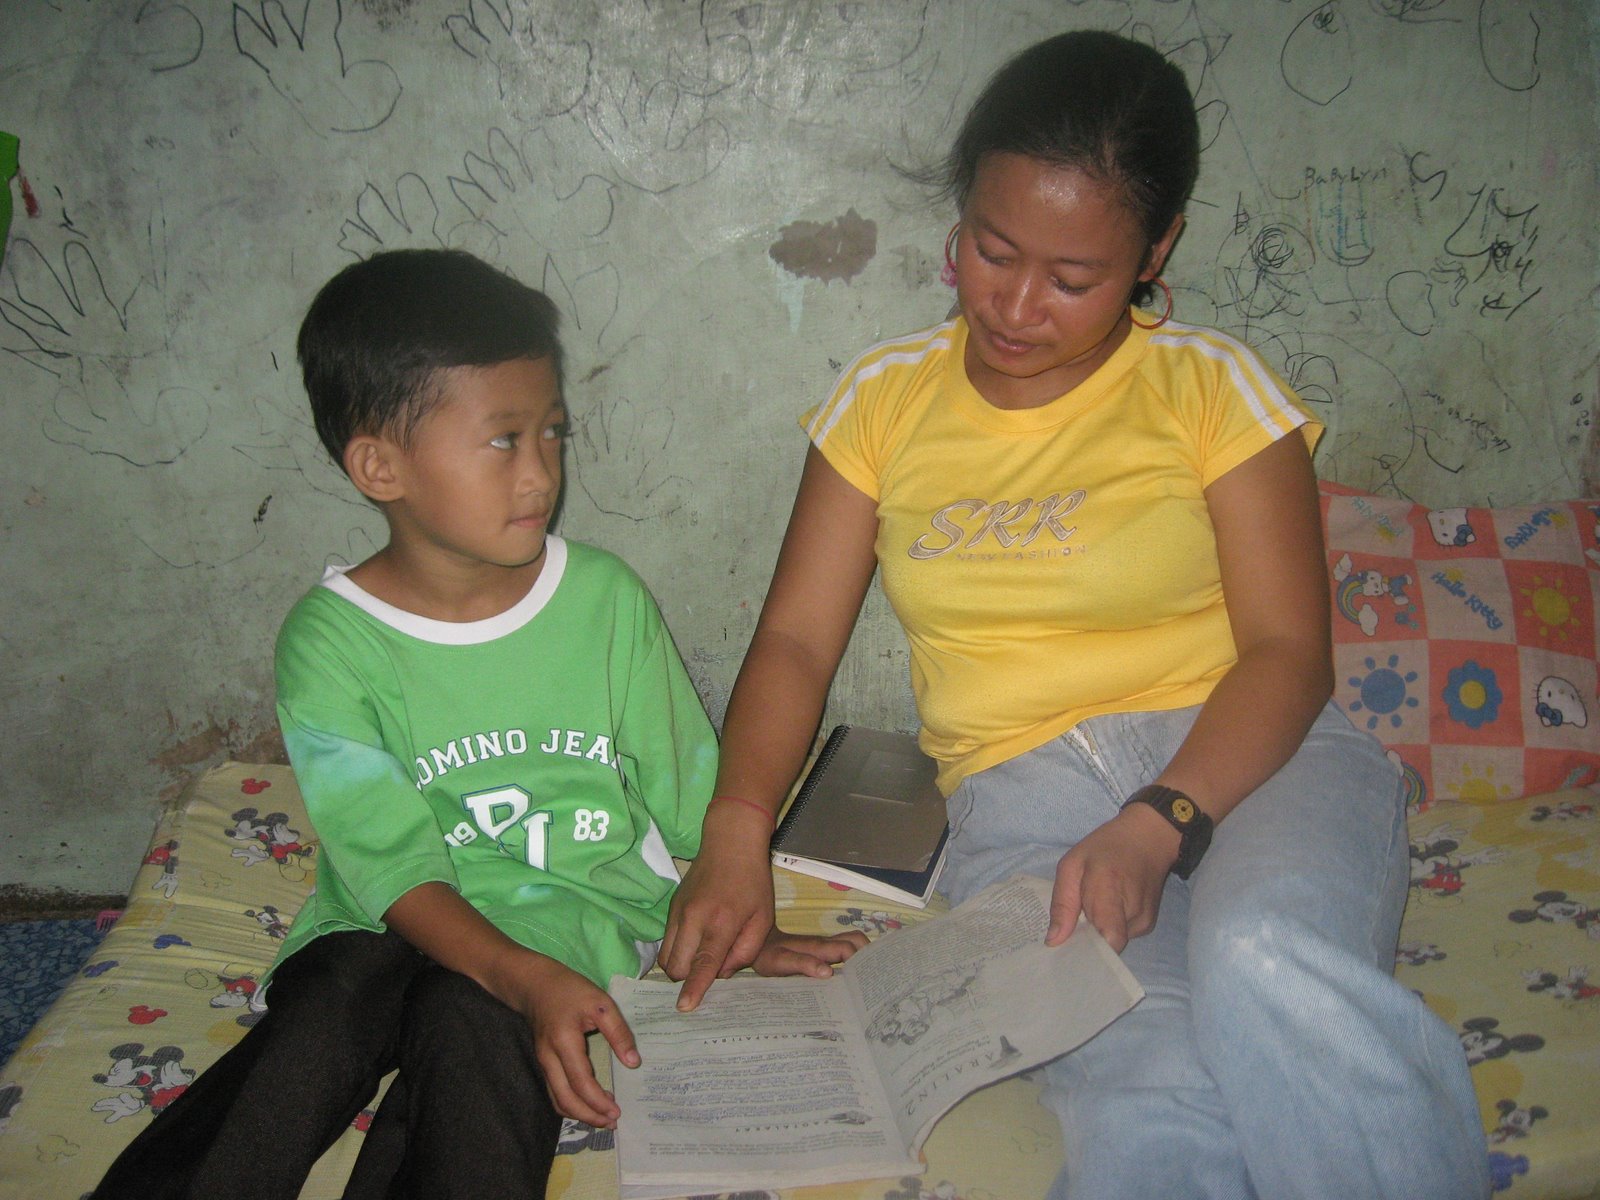 [Sponsored+child+Dante+and+mom+Jocelyn+on+a+reading+sessioJocelyn+is+now+able+to+help+her+children+in+their+homework+after+her+stint+in+the+PAGASA+Adult+Literacy+Program.jpg]